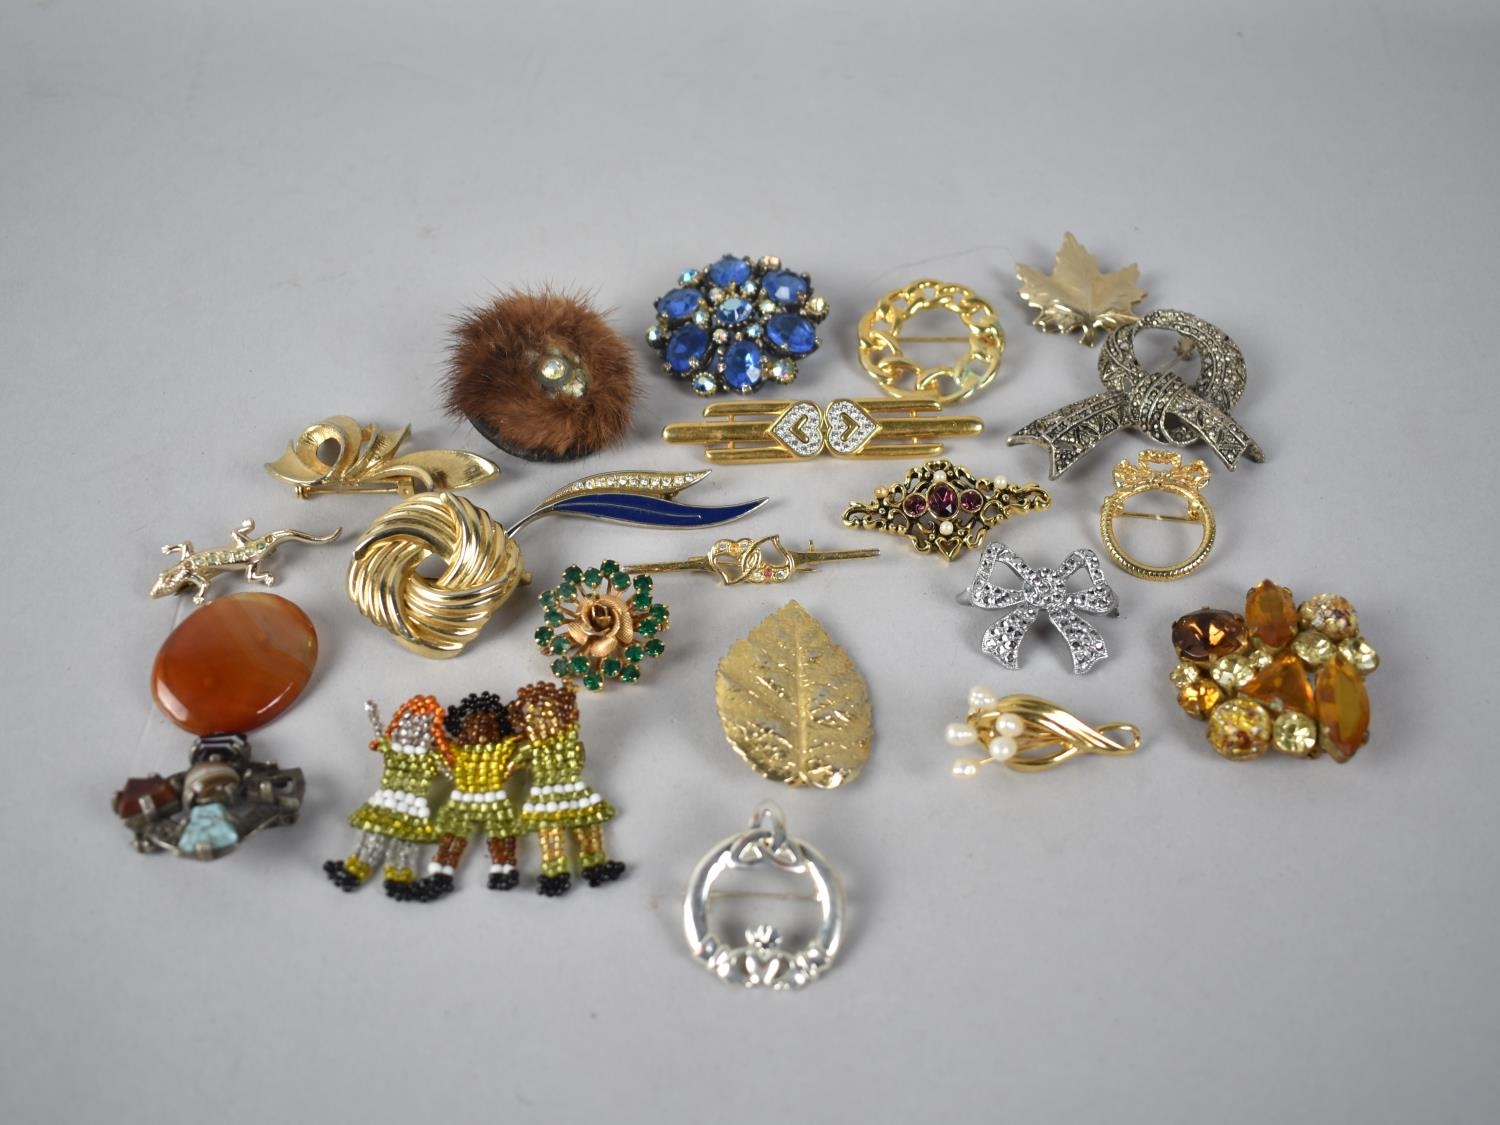 A Mid 20th Century Jewellery Box Containing Costume Brooches